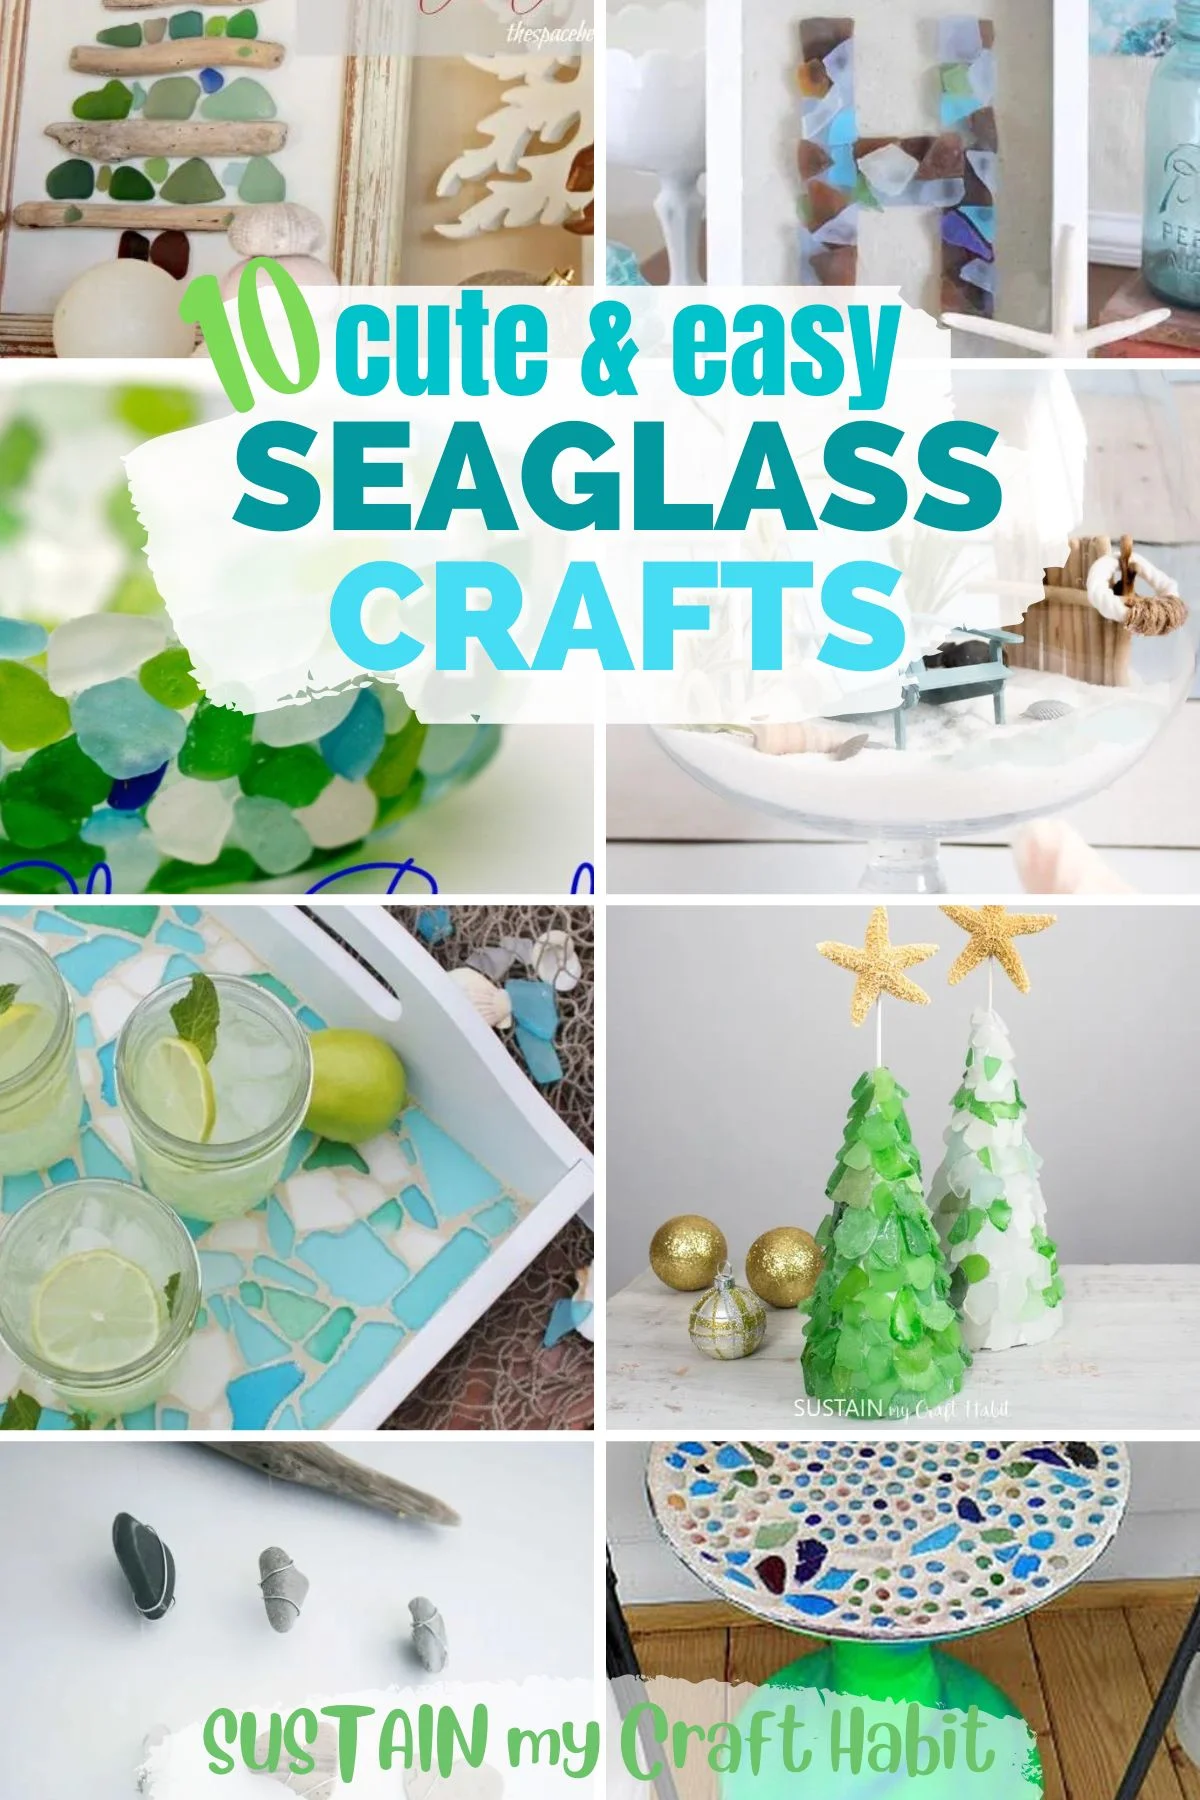 10 Cute and Easy DIY Sea Glass Crafts – Sustain My Craft Habit